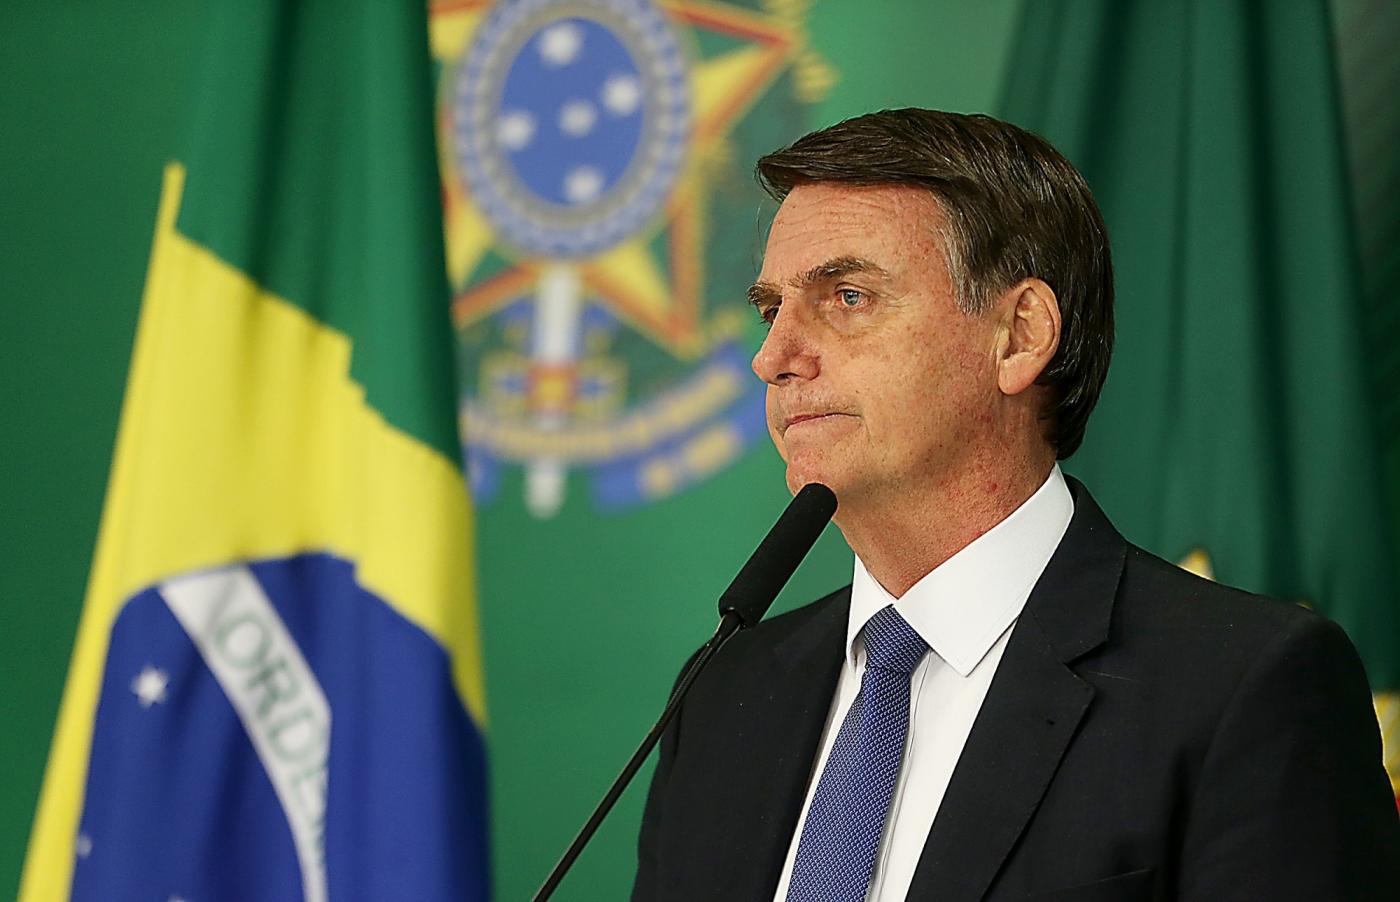 BRASILIA, Jan. 26, 2019 (Xinhua) -- Brazil's President Jair Bolsonaro attends a press conference on the collapse of a dam, at Planalto Palace, in Brasilia, capital of Brazil, on Jan. 25, 2019. At least seven people were killed, nine injured and at least 150 others are missing after a tailings dam collapsed Friday afternoon in southeastern state of Minas Gerais, the state government said Friday evening. (Xinhua/Ernesto Rodrigues/AGENCIA ESTADO/IANS) by .